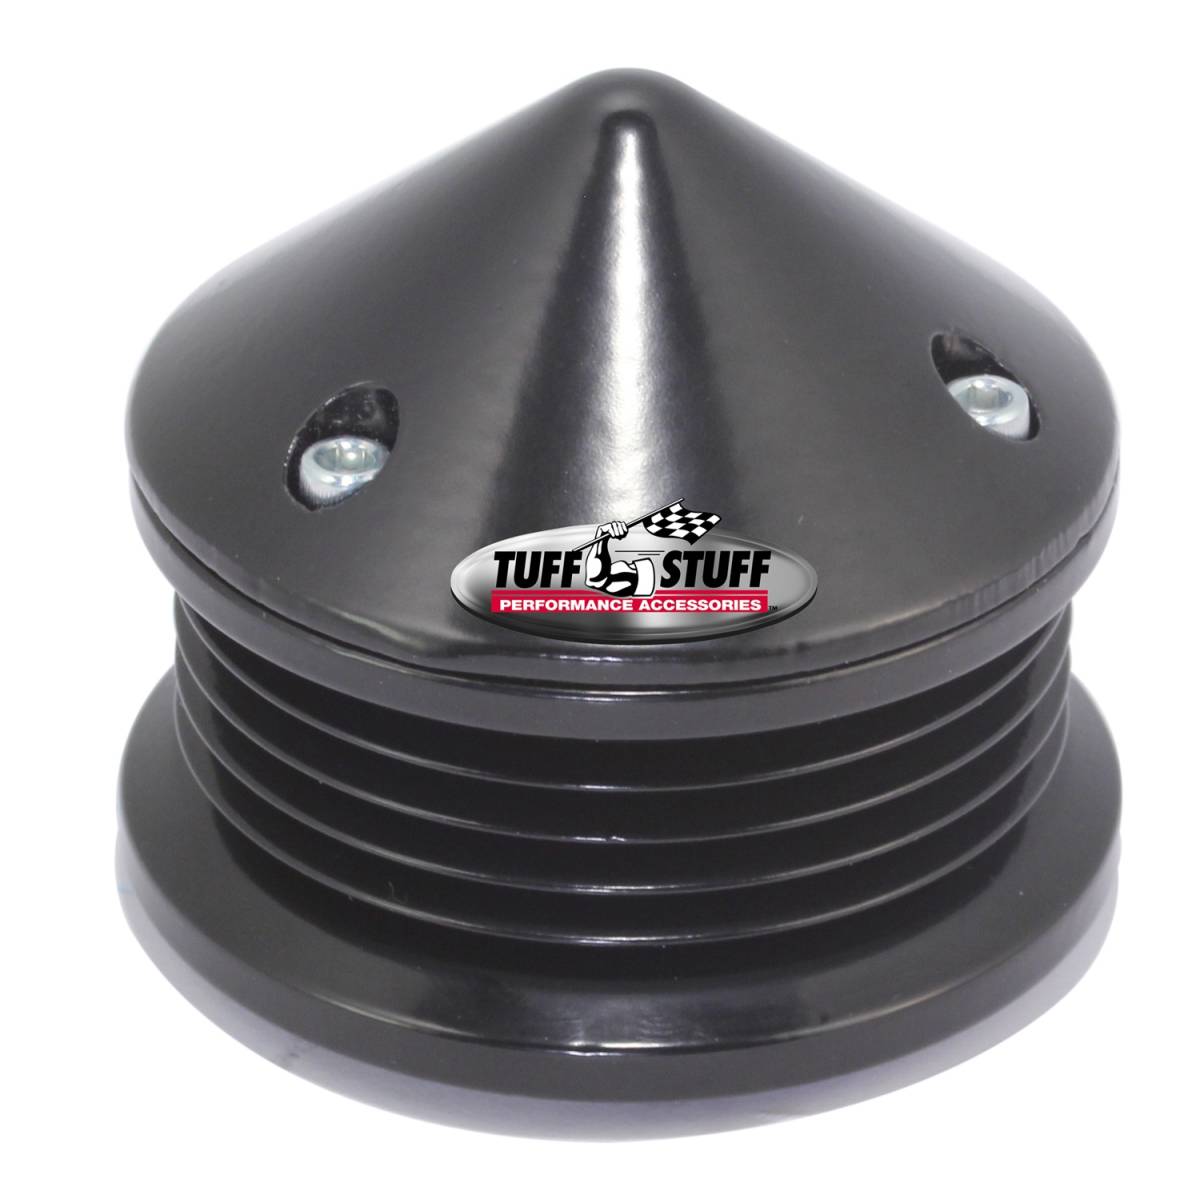 Tuff Stuff Performance - Alternator Pulley And Bullet Cover 2.25 in. Pulley 5 Groove Serpentine Incl. Lock Washer/Nut Stealth Black 7652C